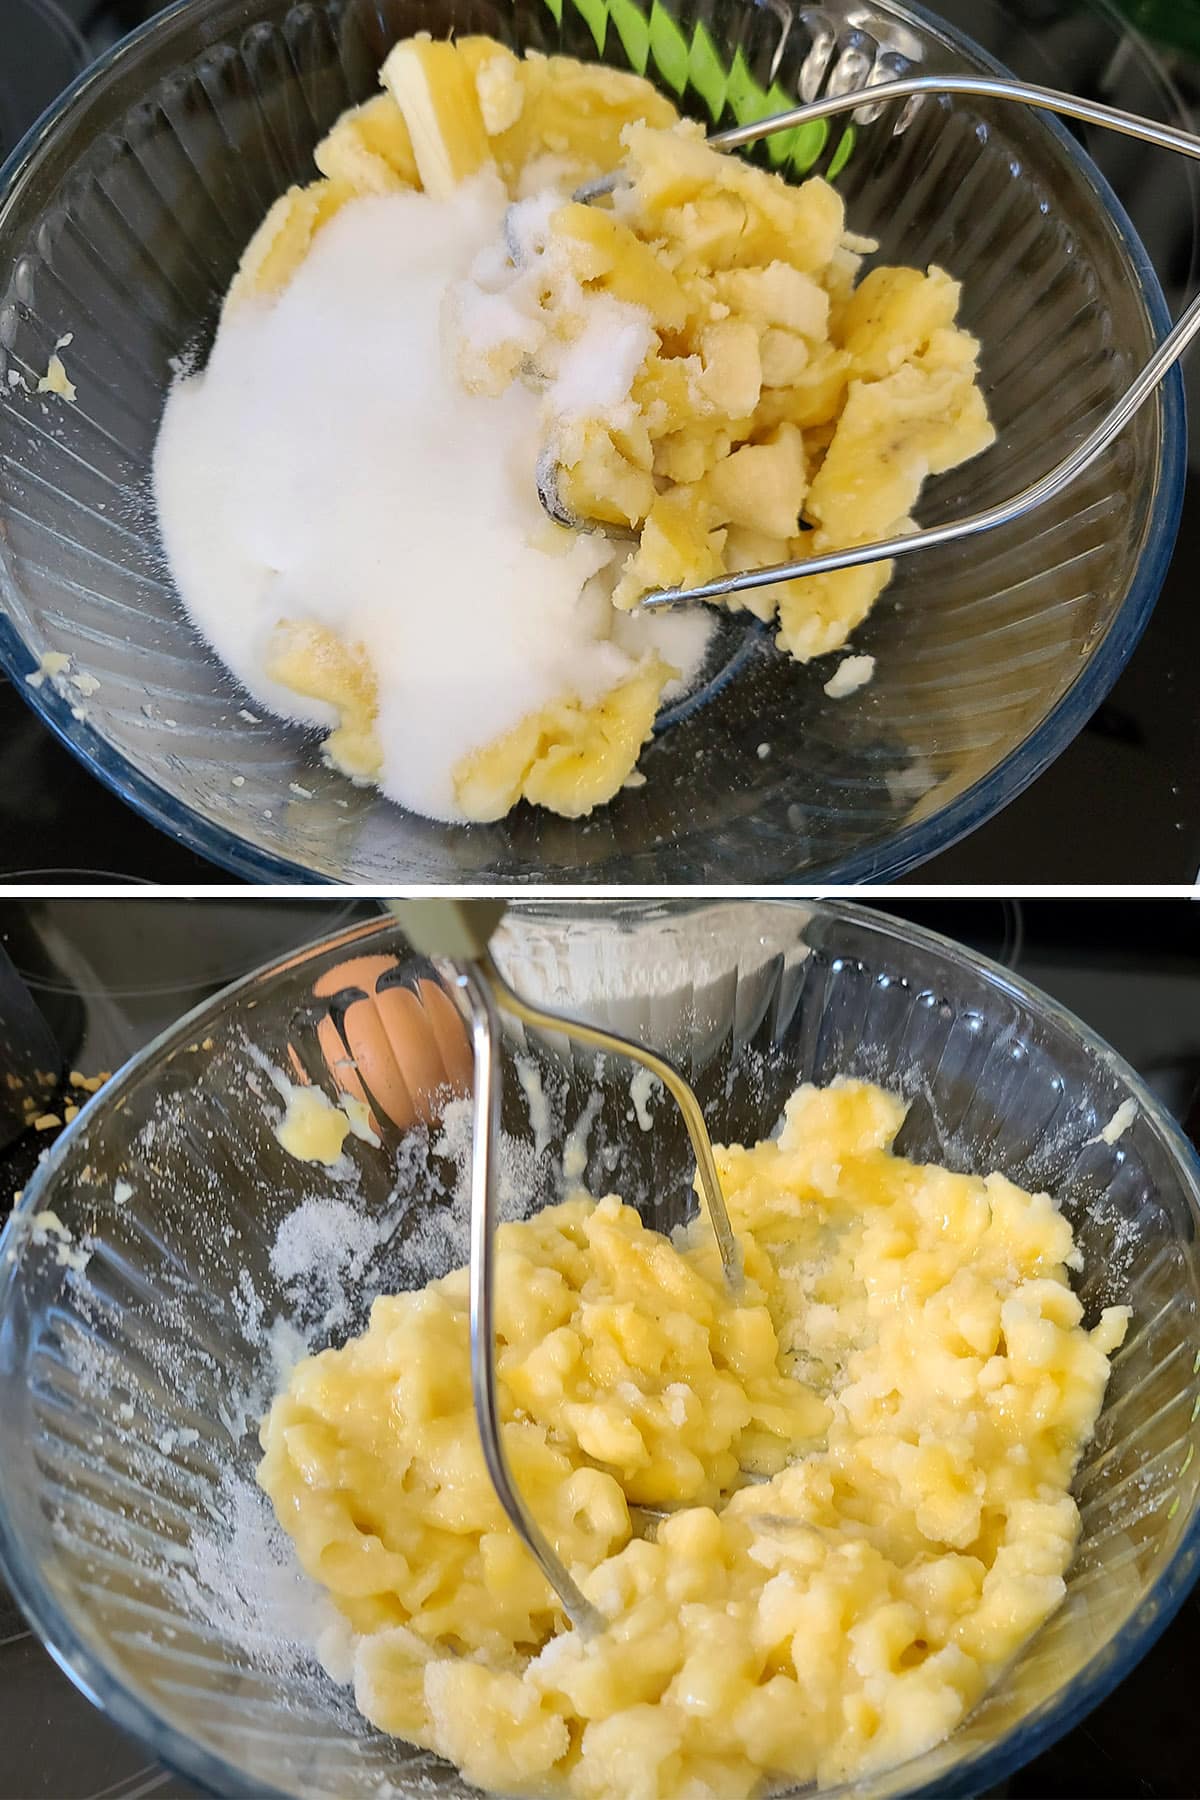 A 2 part image showing the banana and sugar being mashed together.